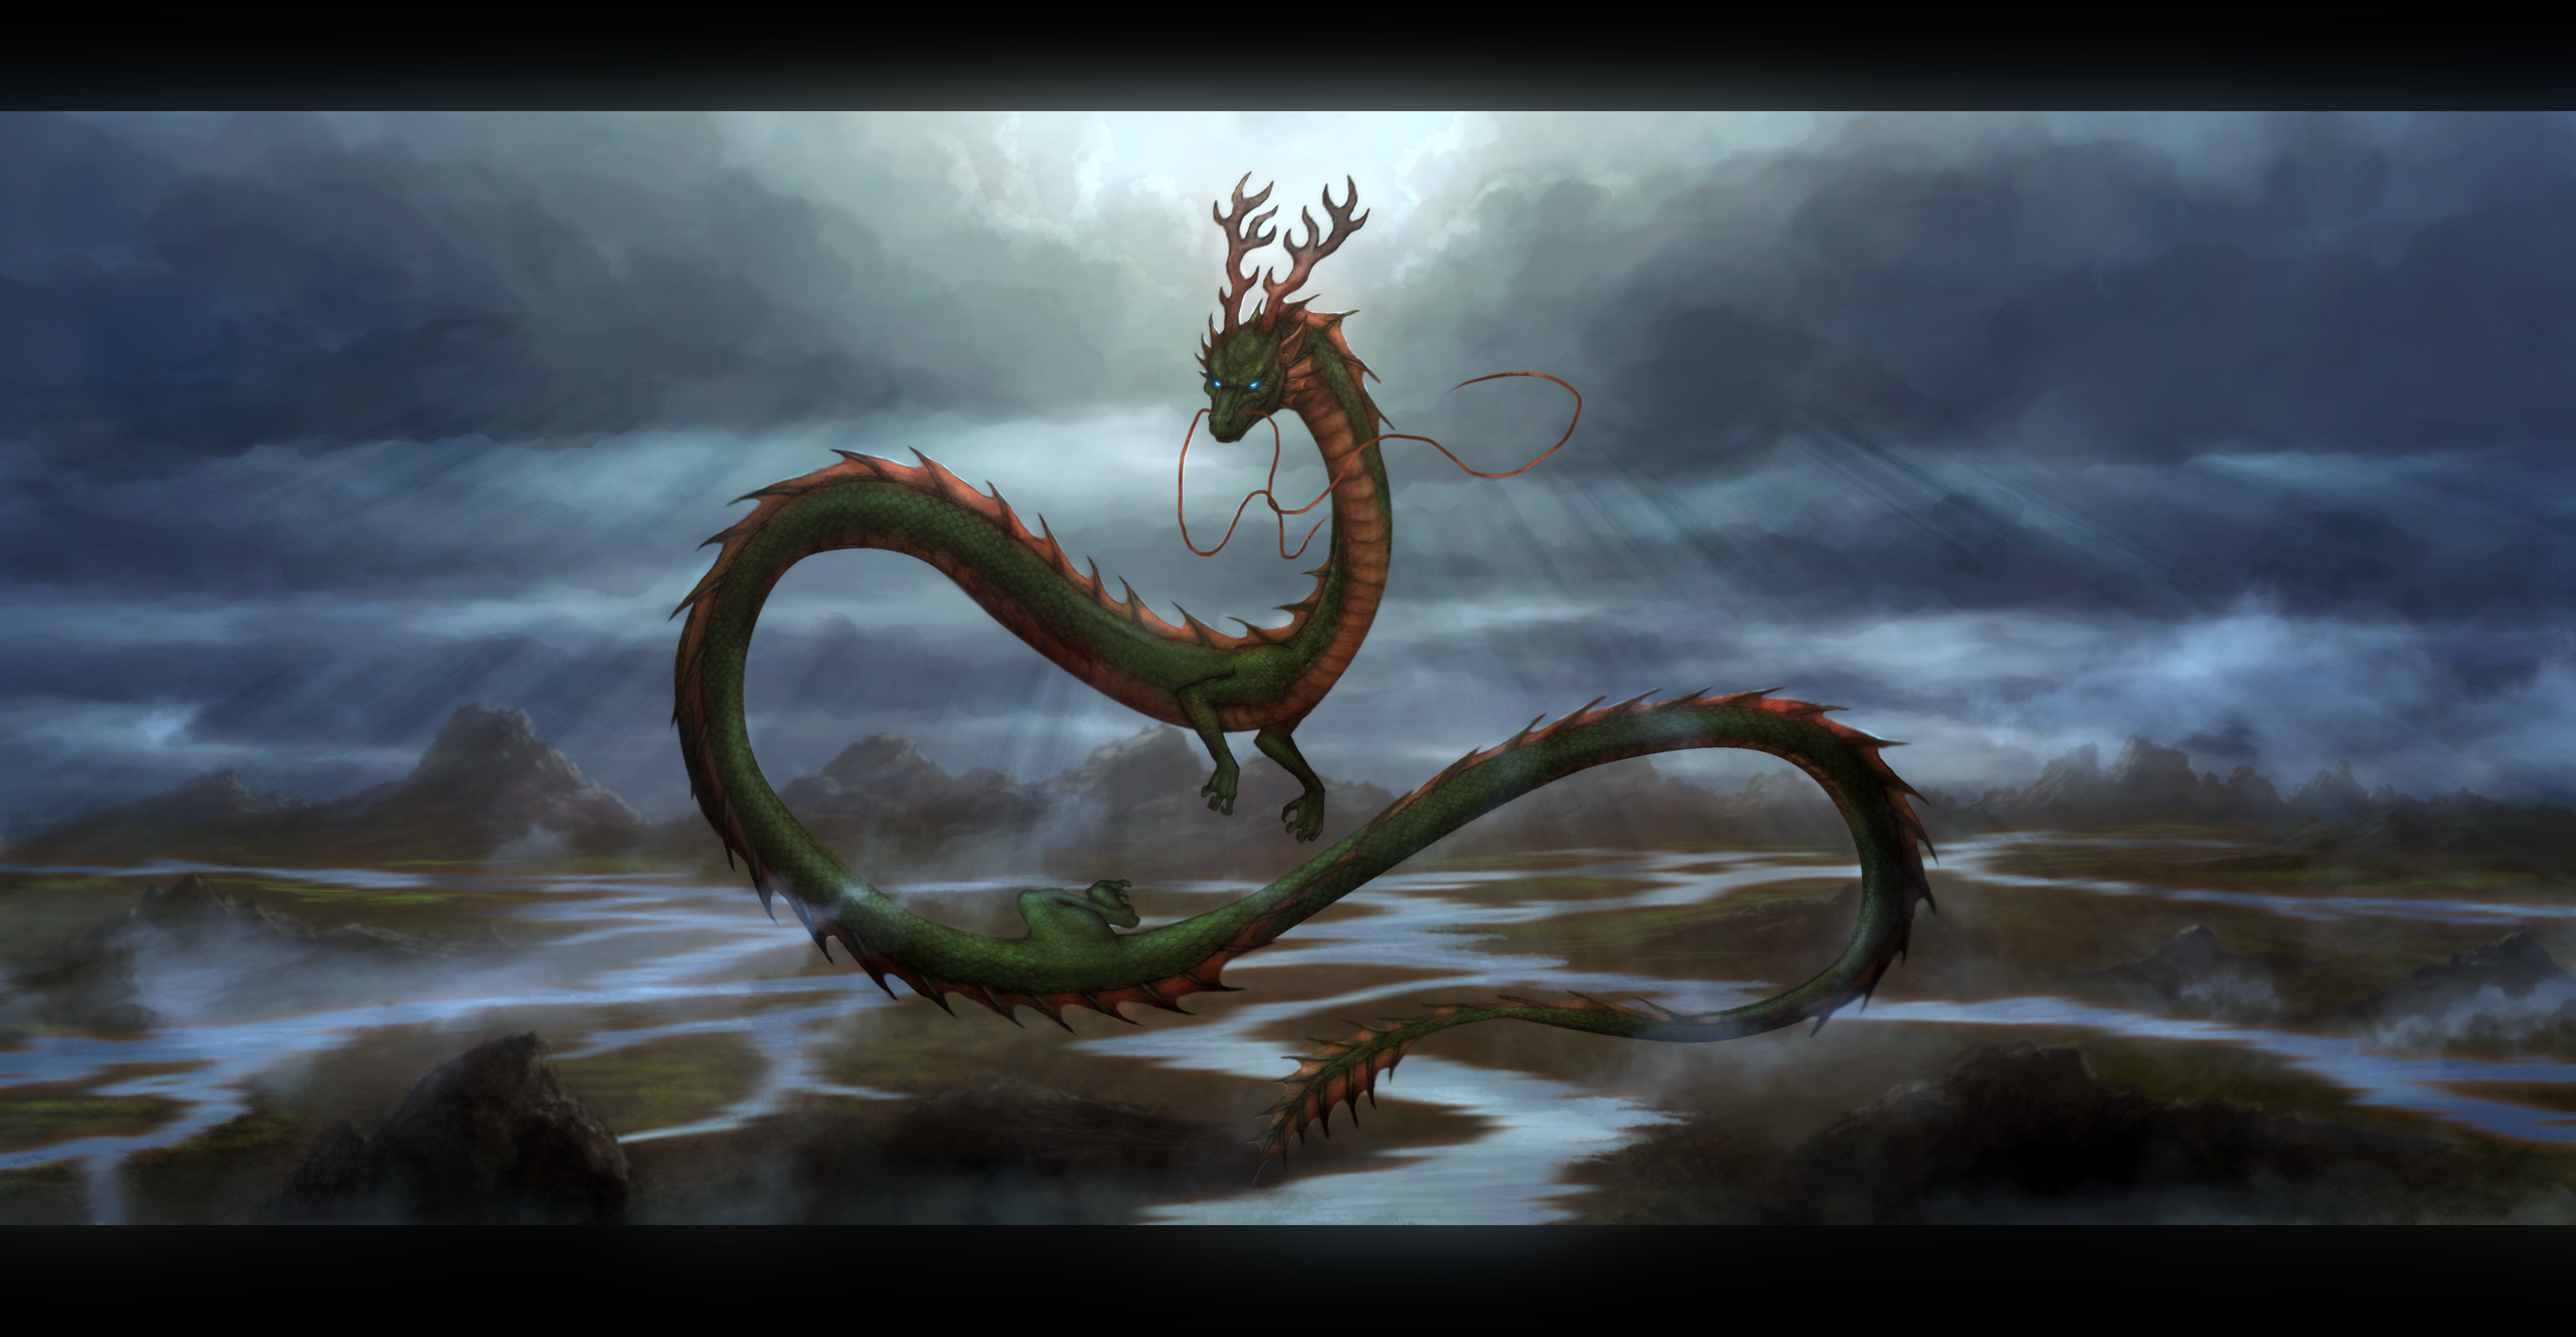 Imoogi Wallpaper Abyss. Mythical creatures, Eastern dragon, Mythological creatures